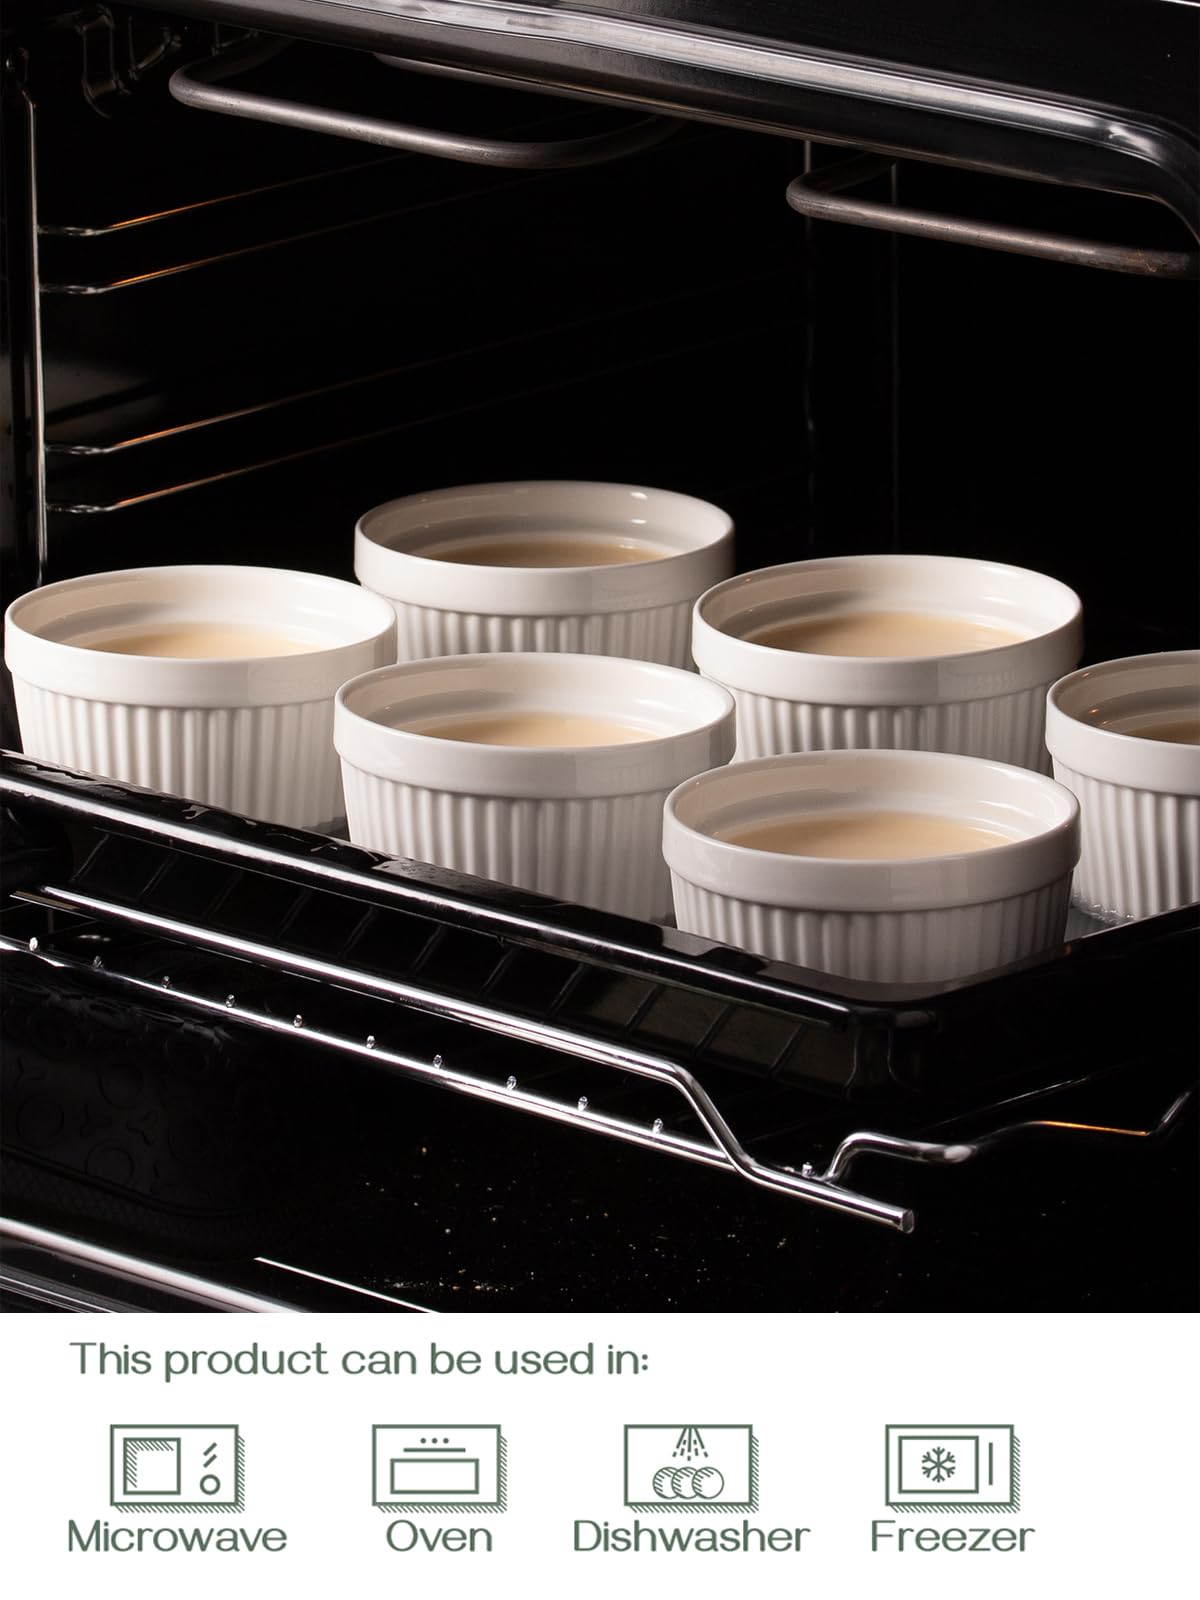 DOWAN Ramekins 8 oz Oven Safe with Lids, Creme brulee Ramekins Bowls with Covers, Porcelain White Ramekins Souffle Dishes for Baking, Stackable, Set of 6